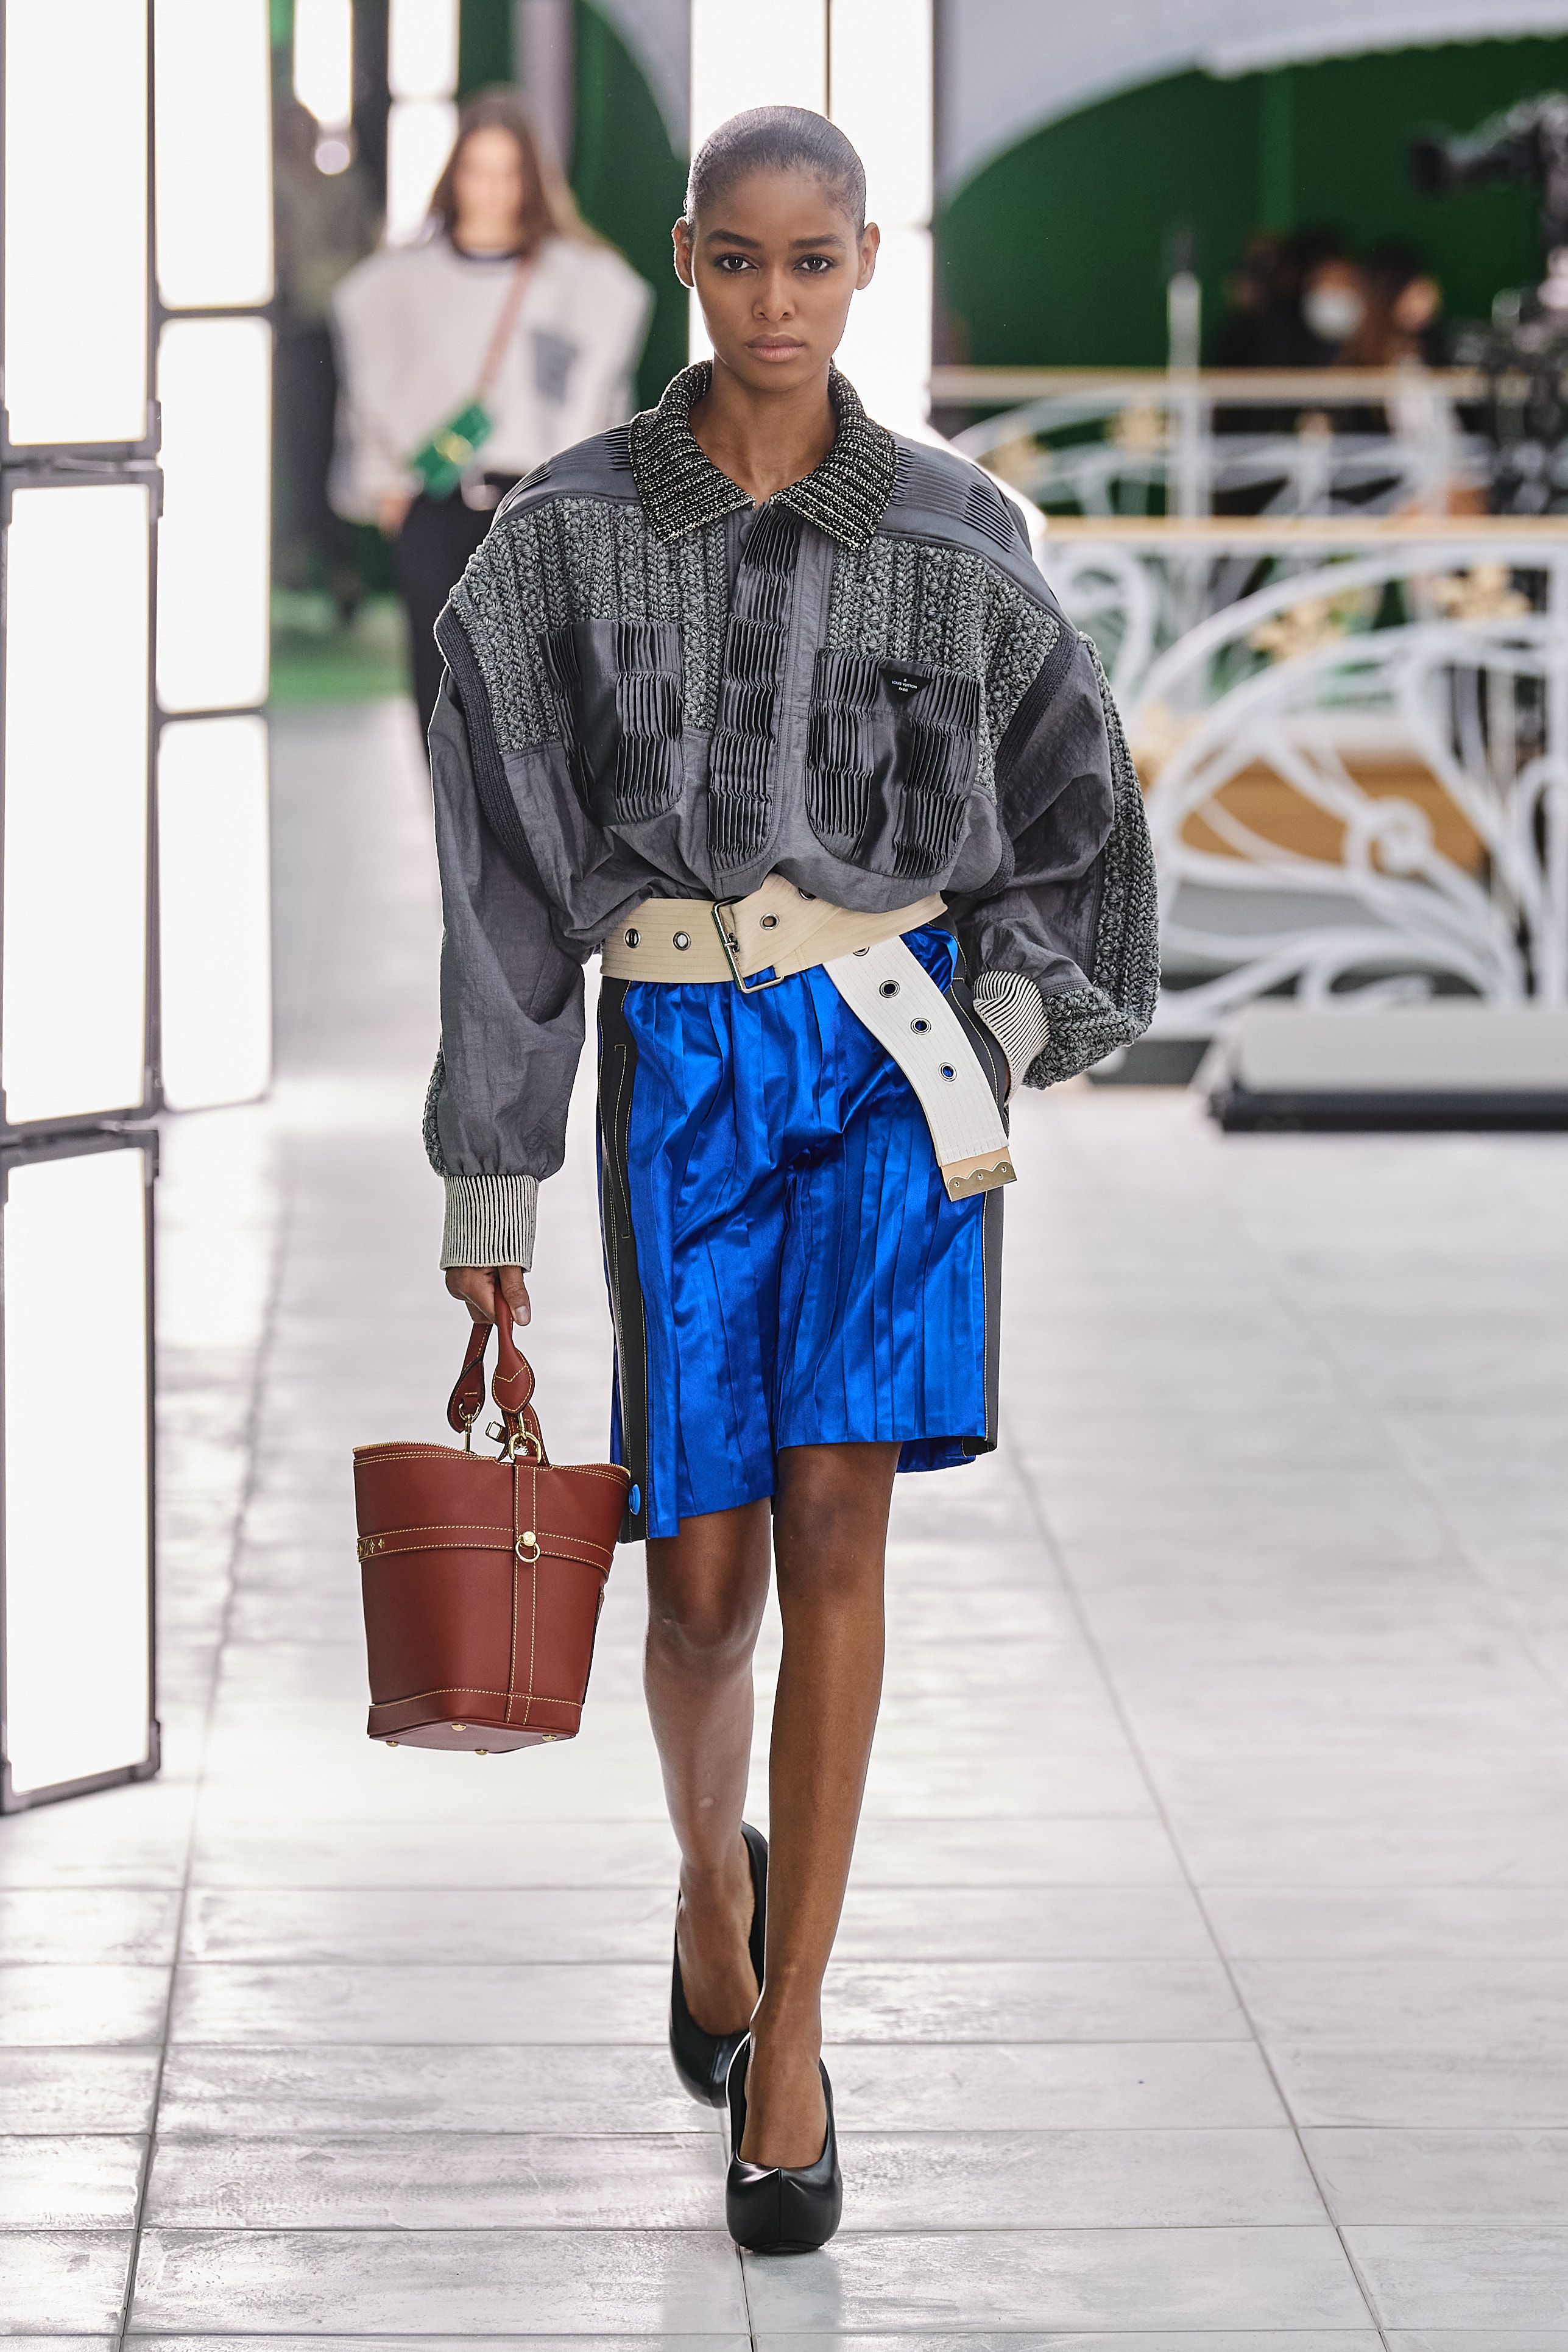 Highlights from the spring/summer 2021 collections